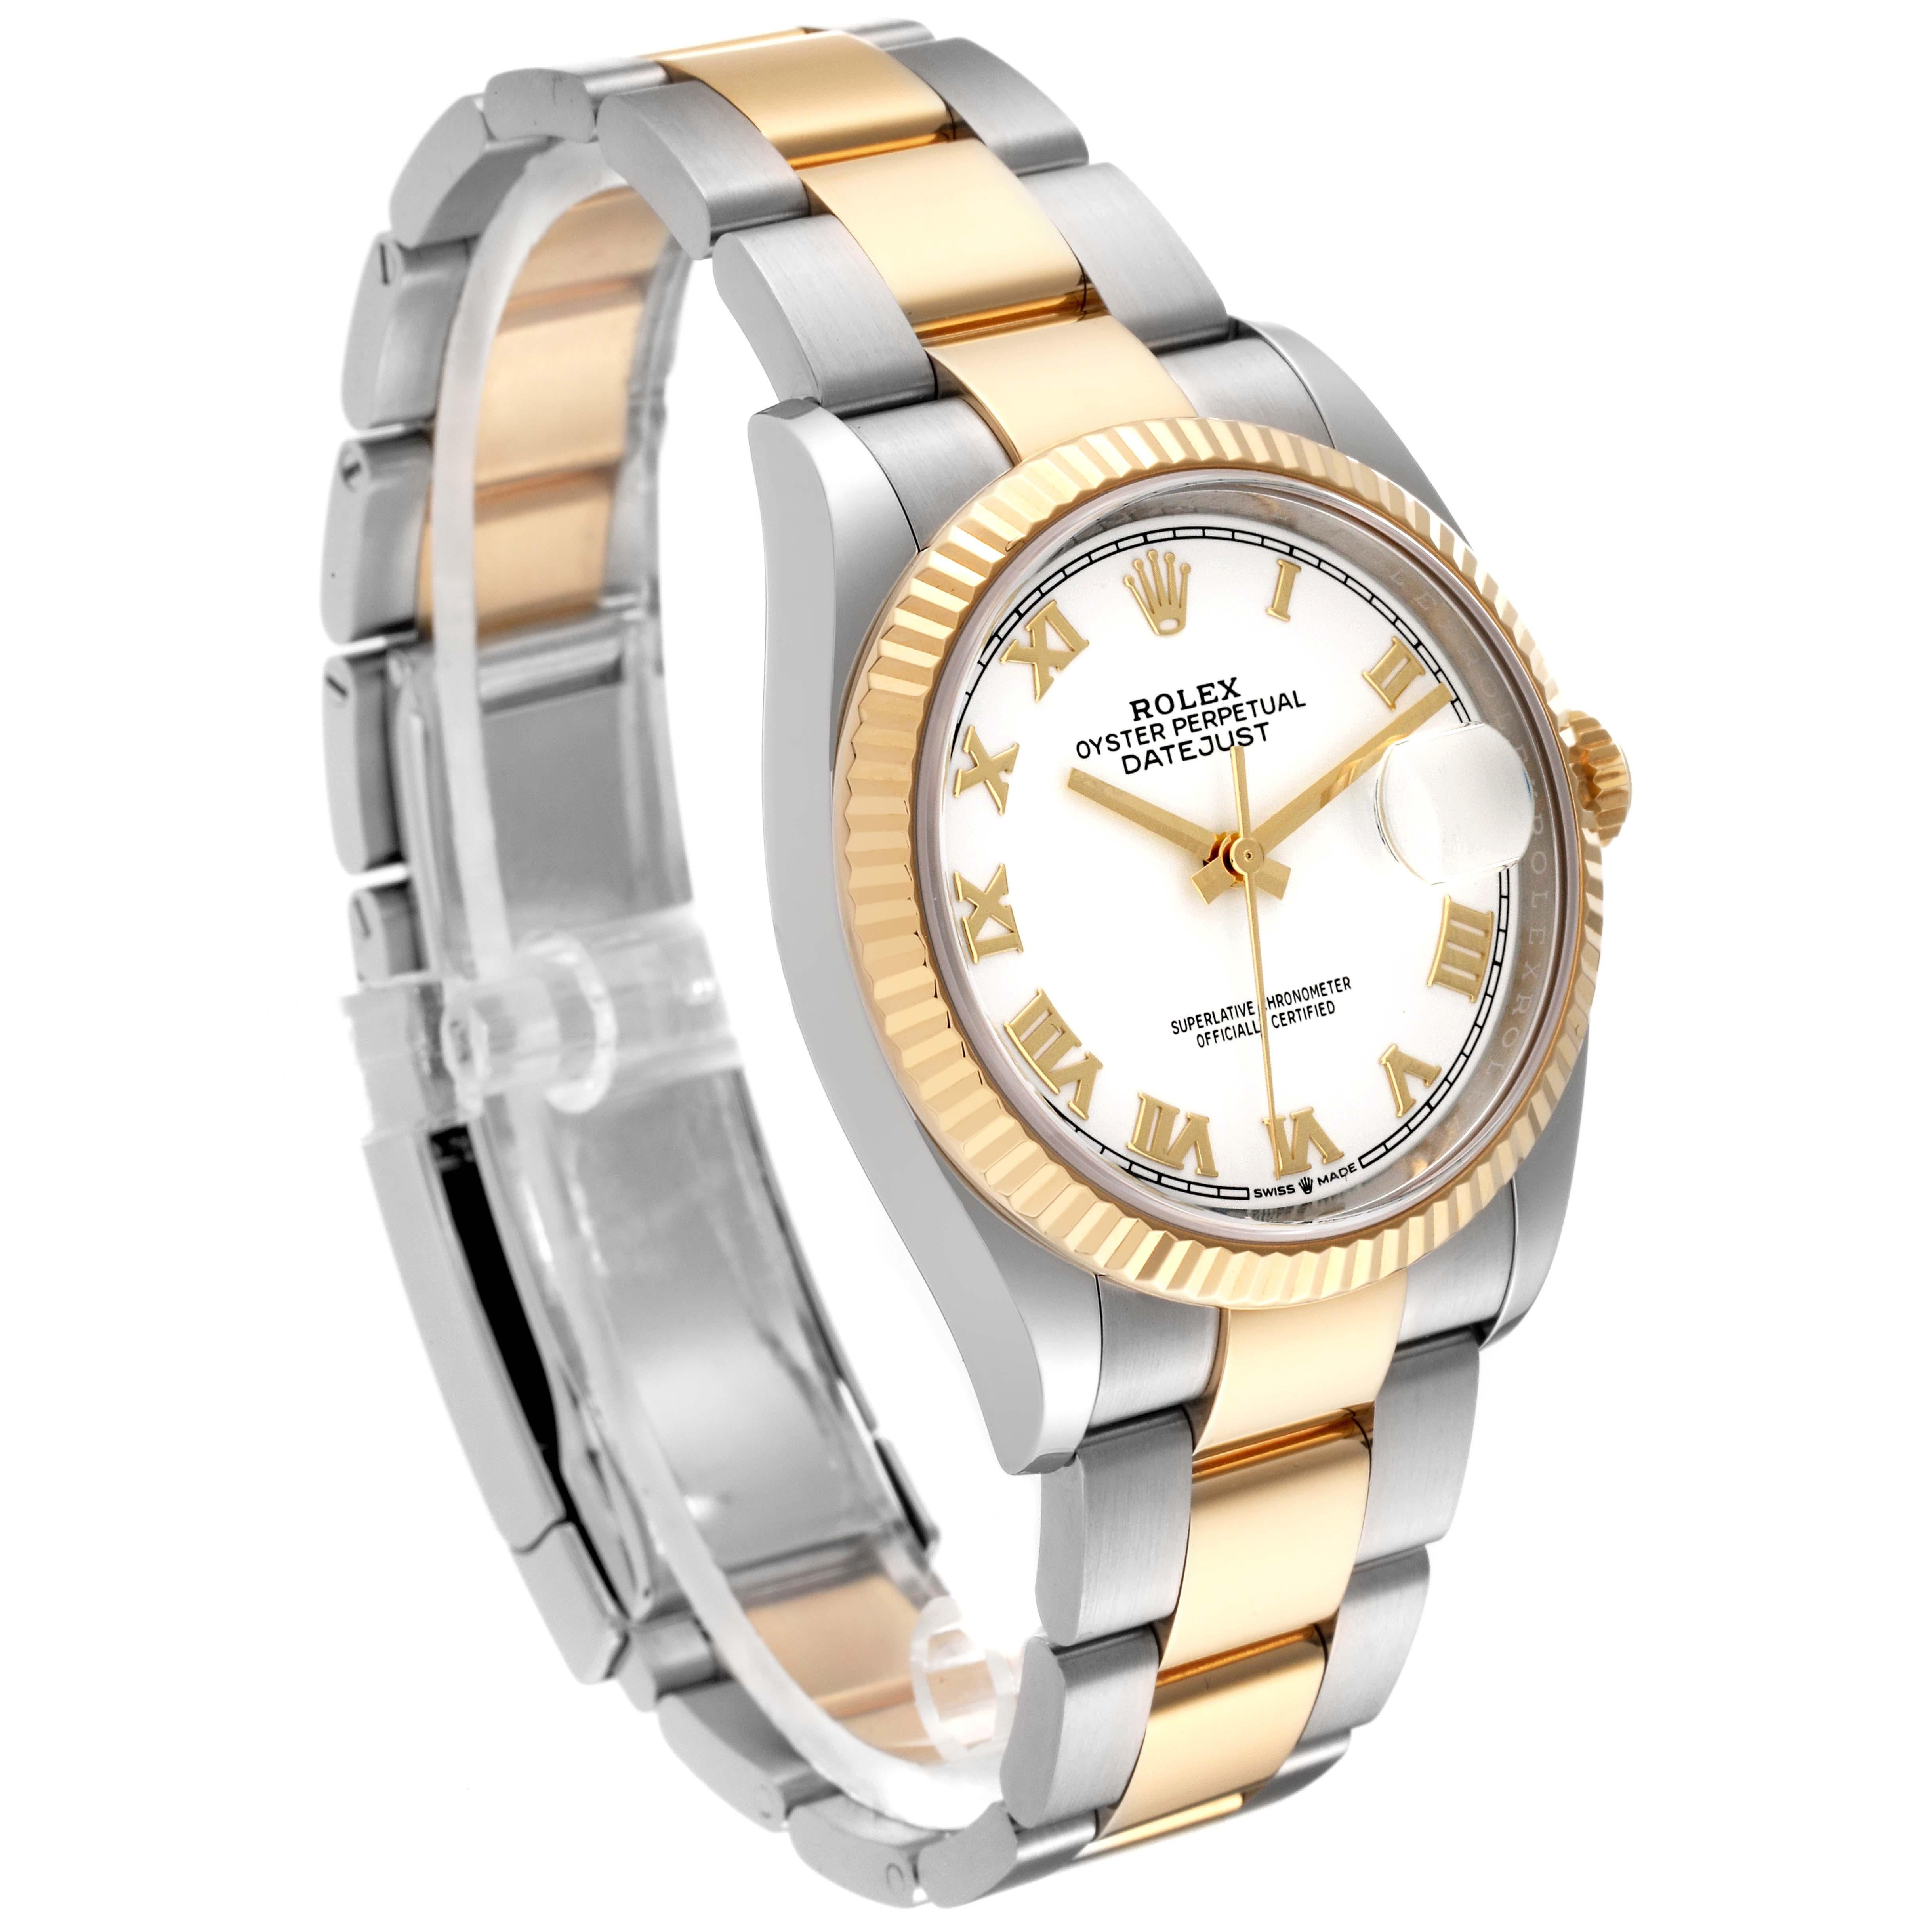 Rolex Datejust Steel Yellow Gold White Dial Mens Watch 126233 Box Card For Sale 3